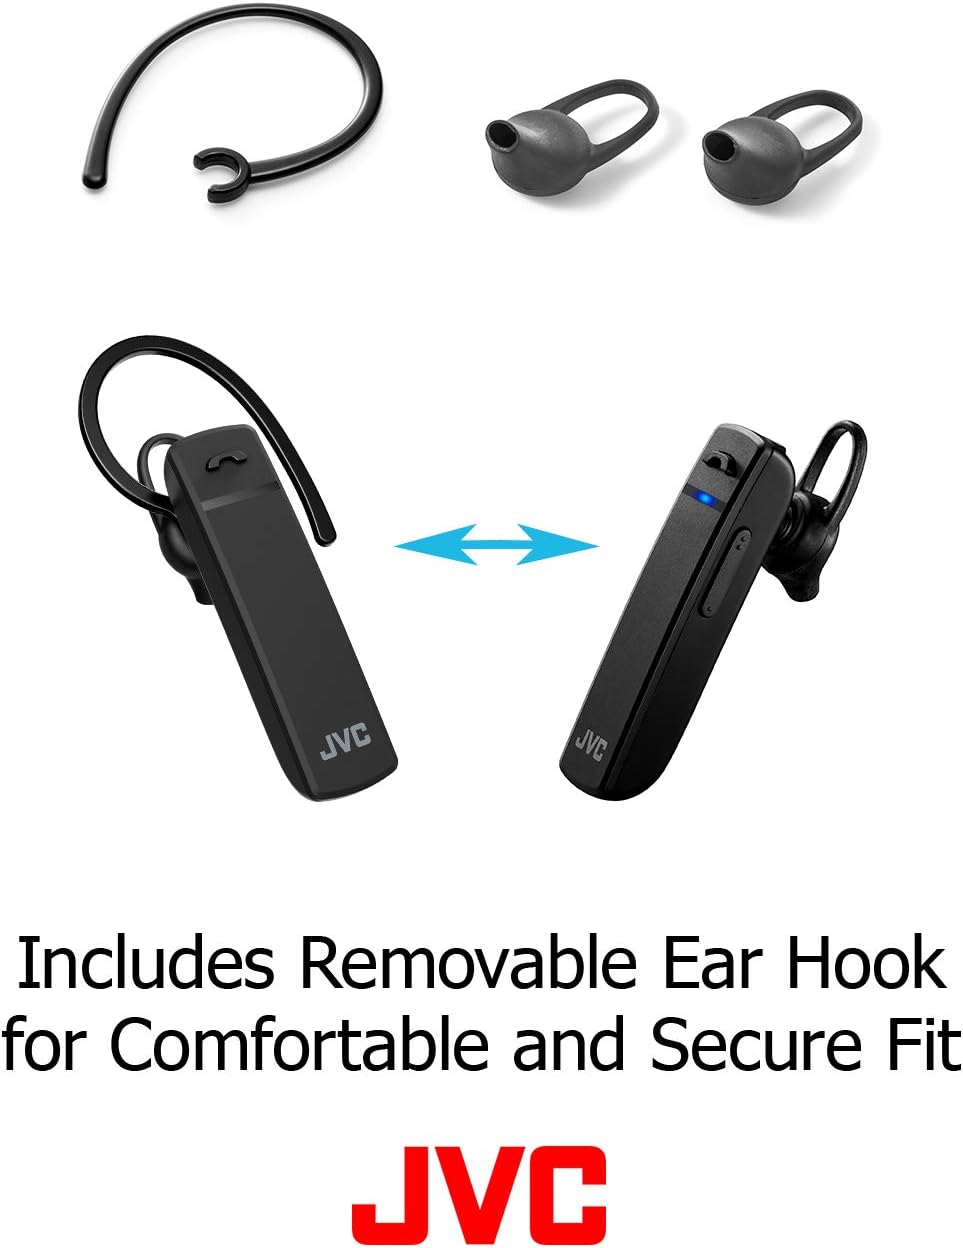 Tecno Ace A2 Se Stylish Single Ear Crystal Clear Calls 5.0 Bluetooth Truly Wireless in Ear Earbuds with Mic IPX4 Water Sweat and Dust Resistant More Than 7 Hours Playback time (Black)